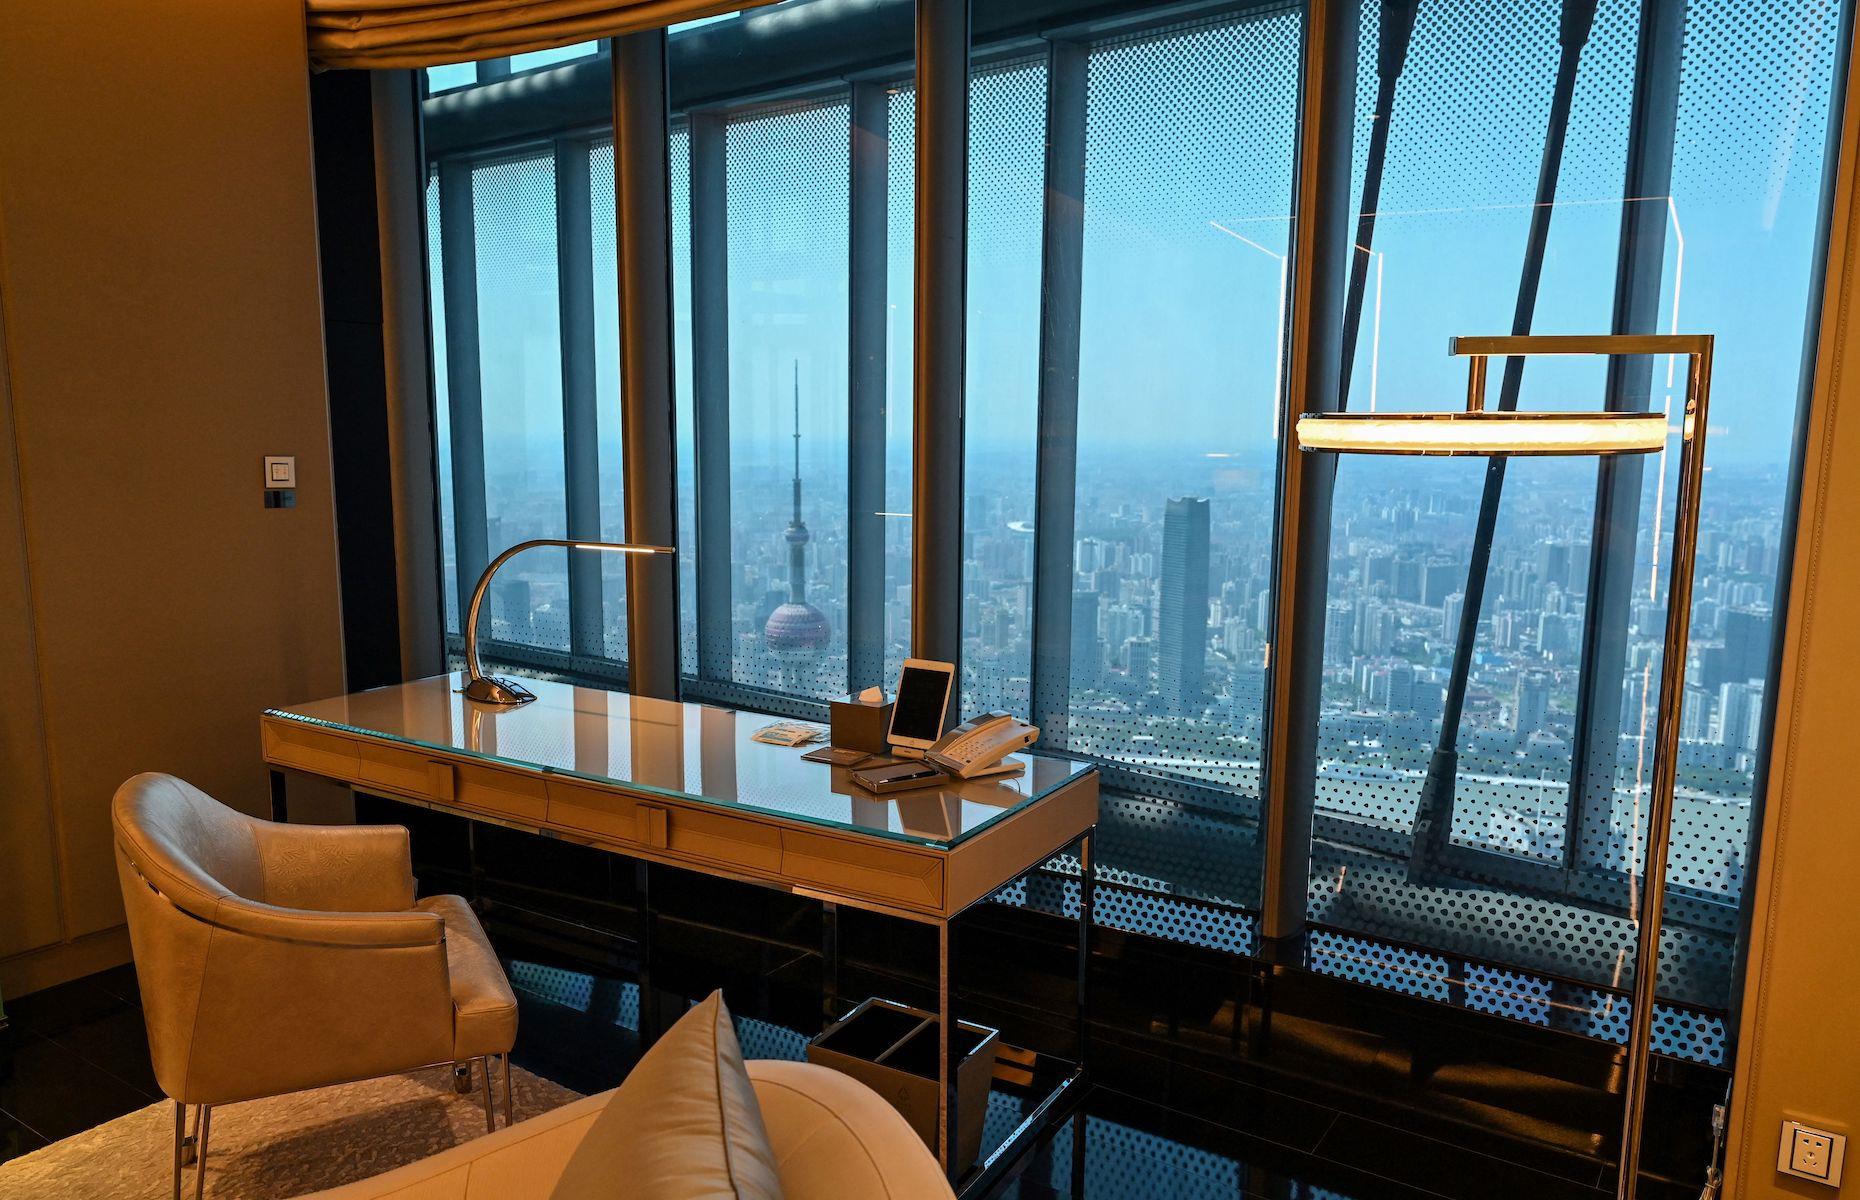 <p>Opened in June 2021 within the 1,841-foot (561m) Shanghai Tower, <a href="https://www.jhotel-shanghai.com/en/">J Hotel</a> is dubbed the world's highest hotel. Located across floors 84 to 105 and the 120th floor, its luxurious 165 rooms offer a stunning vantage point over the high-rise city, including the Yangtze River and Shanghai's financial hub Lujiazui . The views on cloudy days are no less breathtaking as guests awake surrounded by billowing clouds.</p>